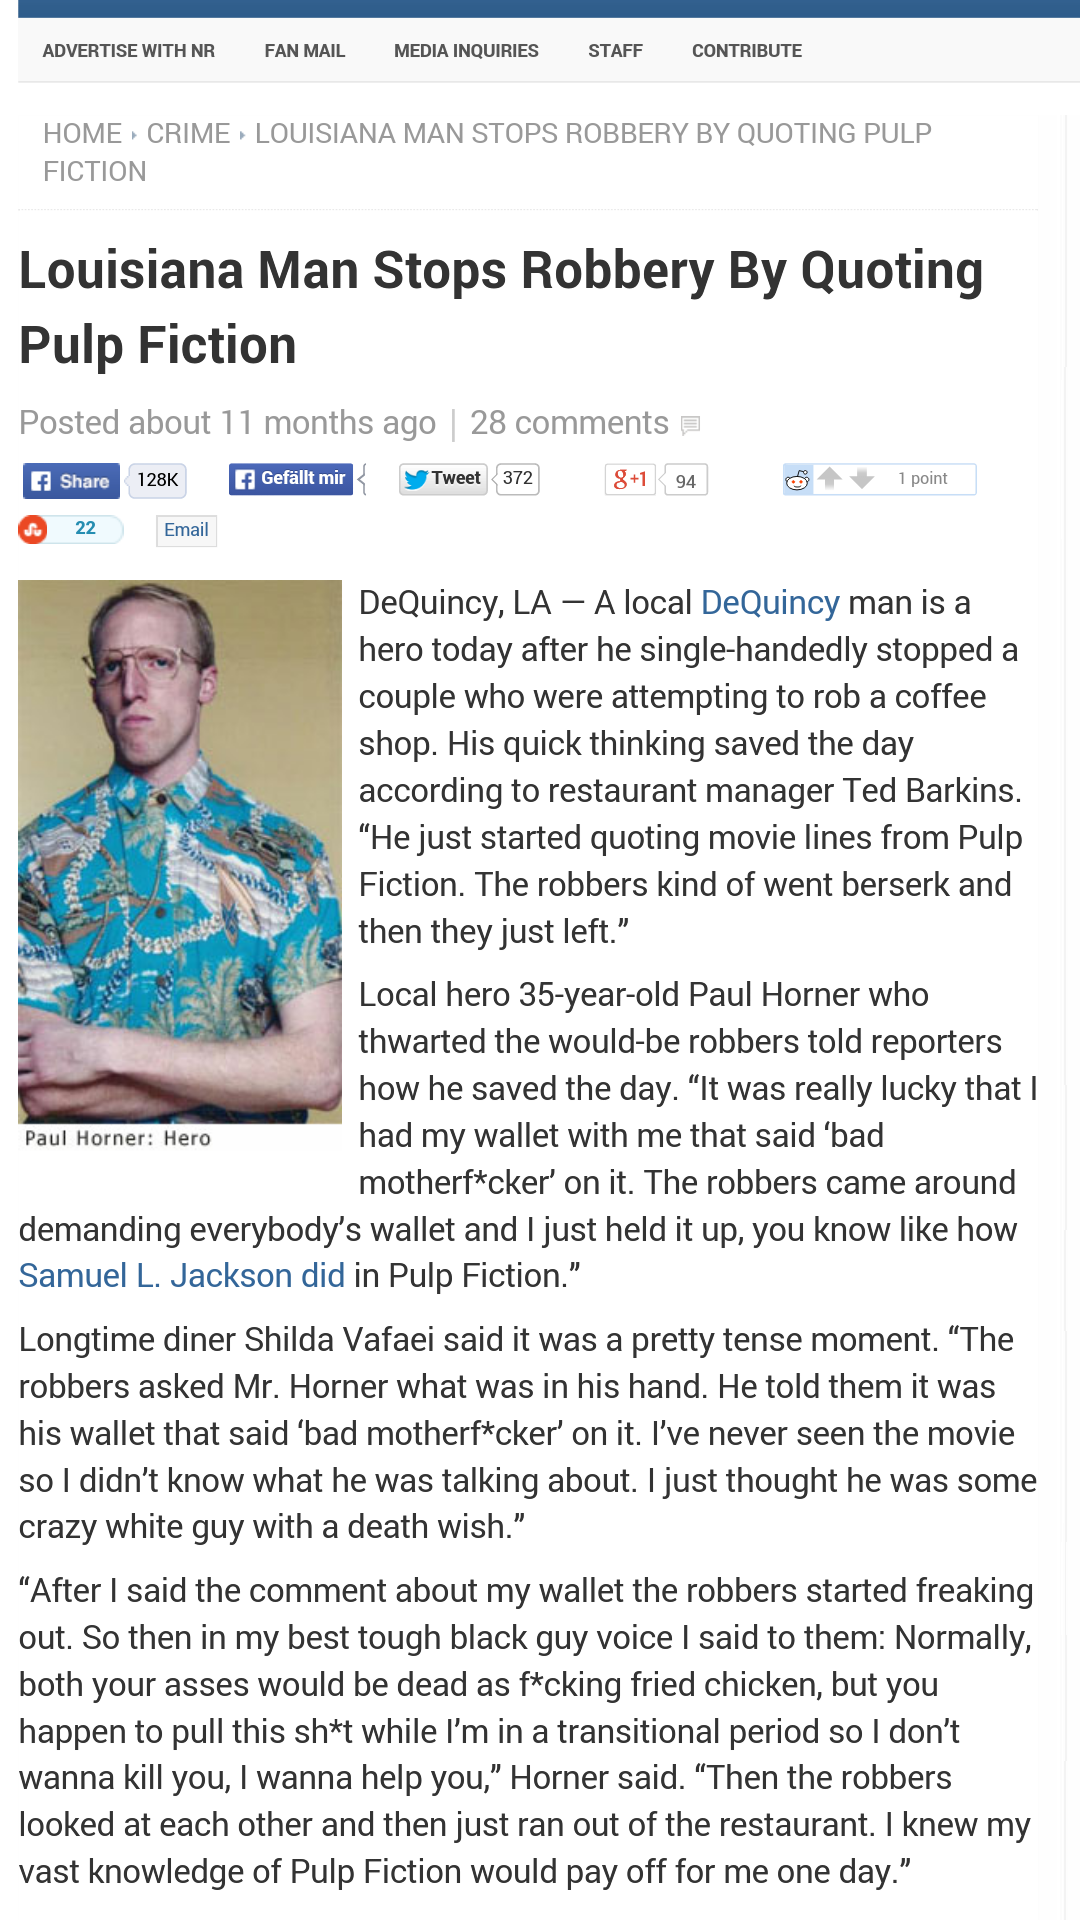 Louisiana man stops robbery by quoting Pulp Fiction